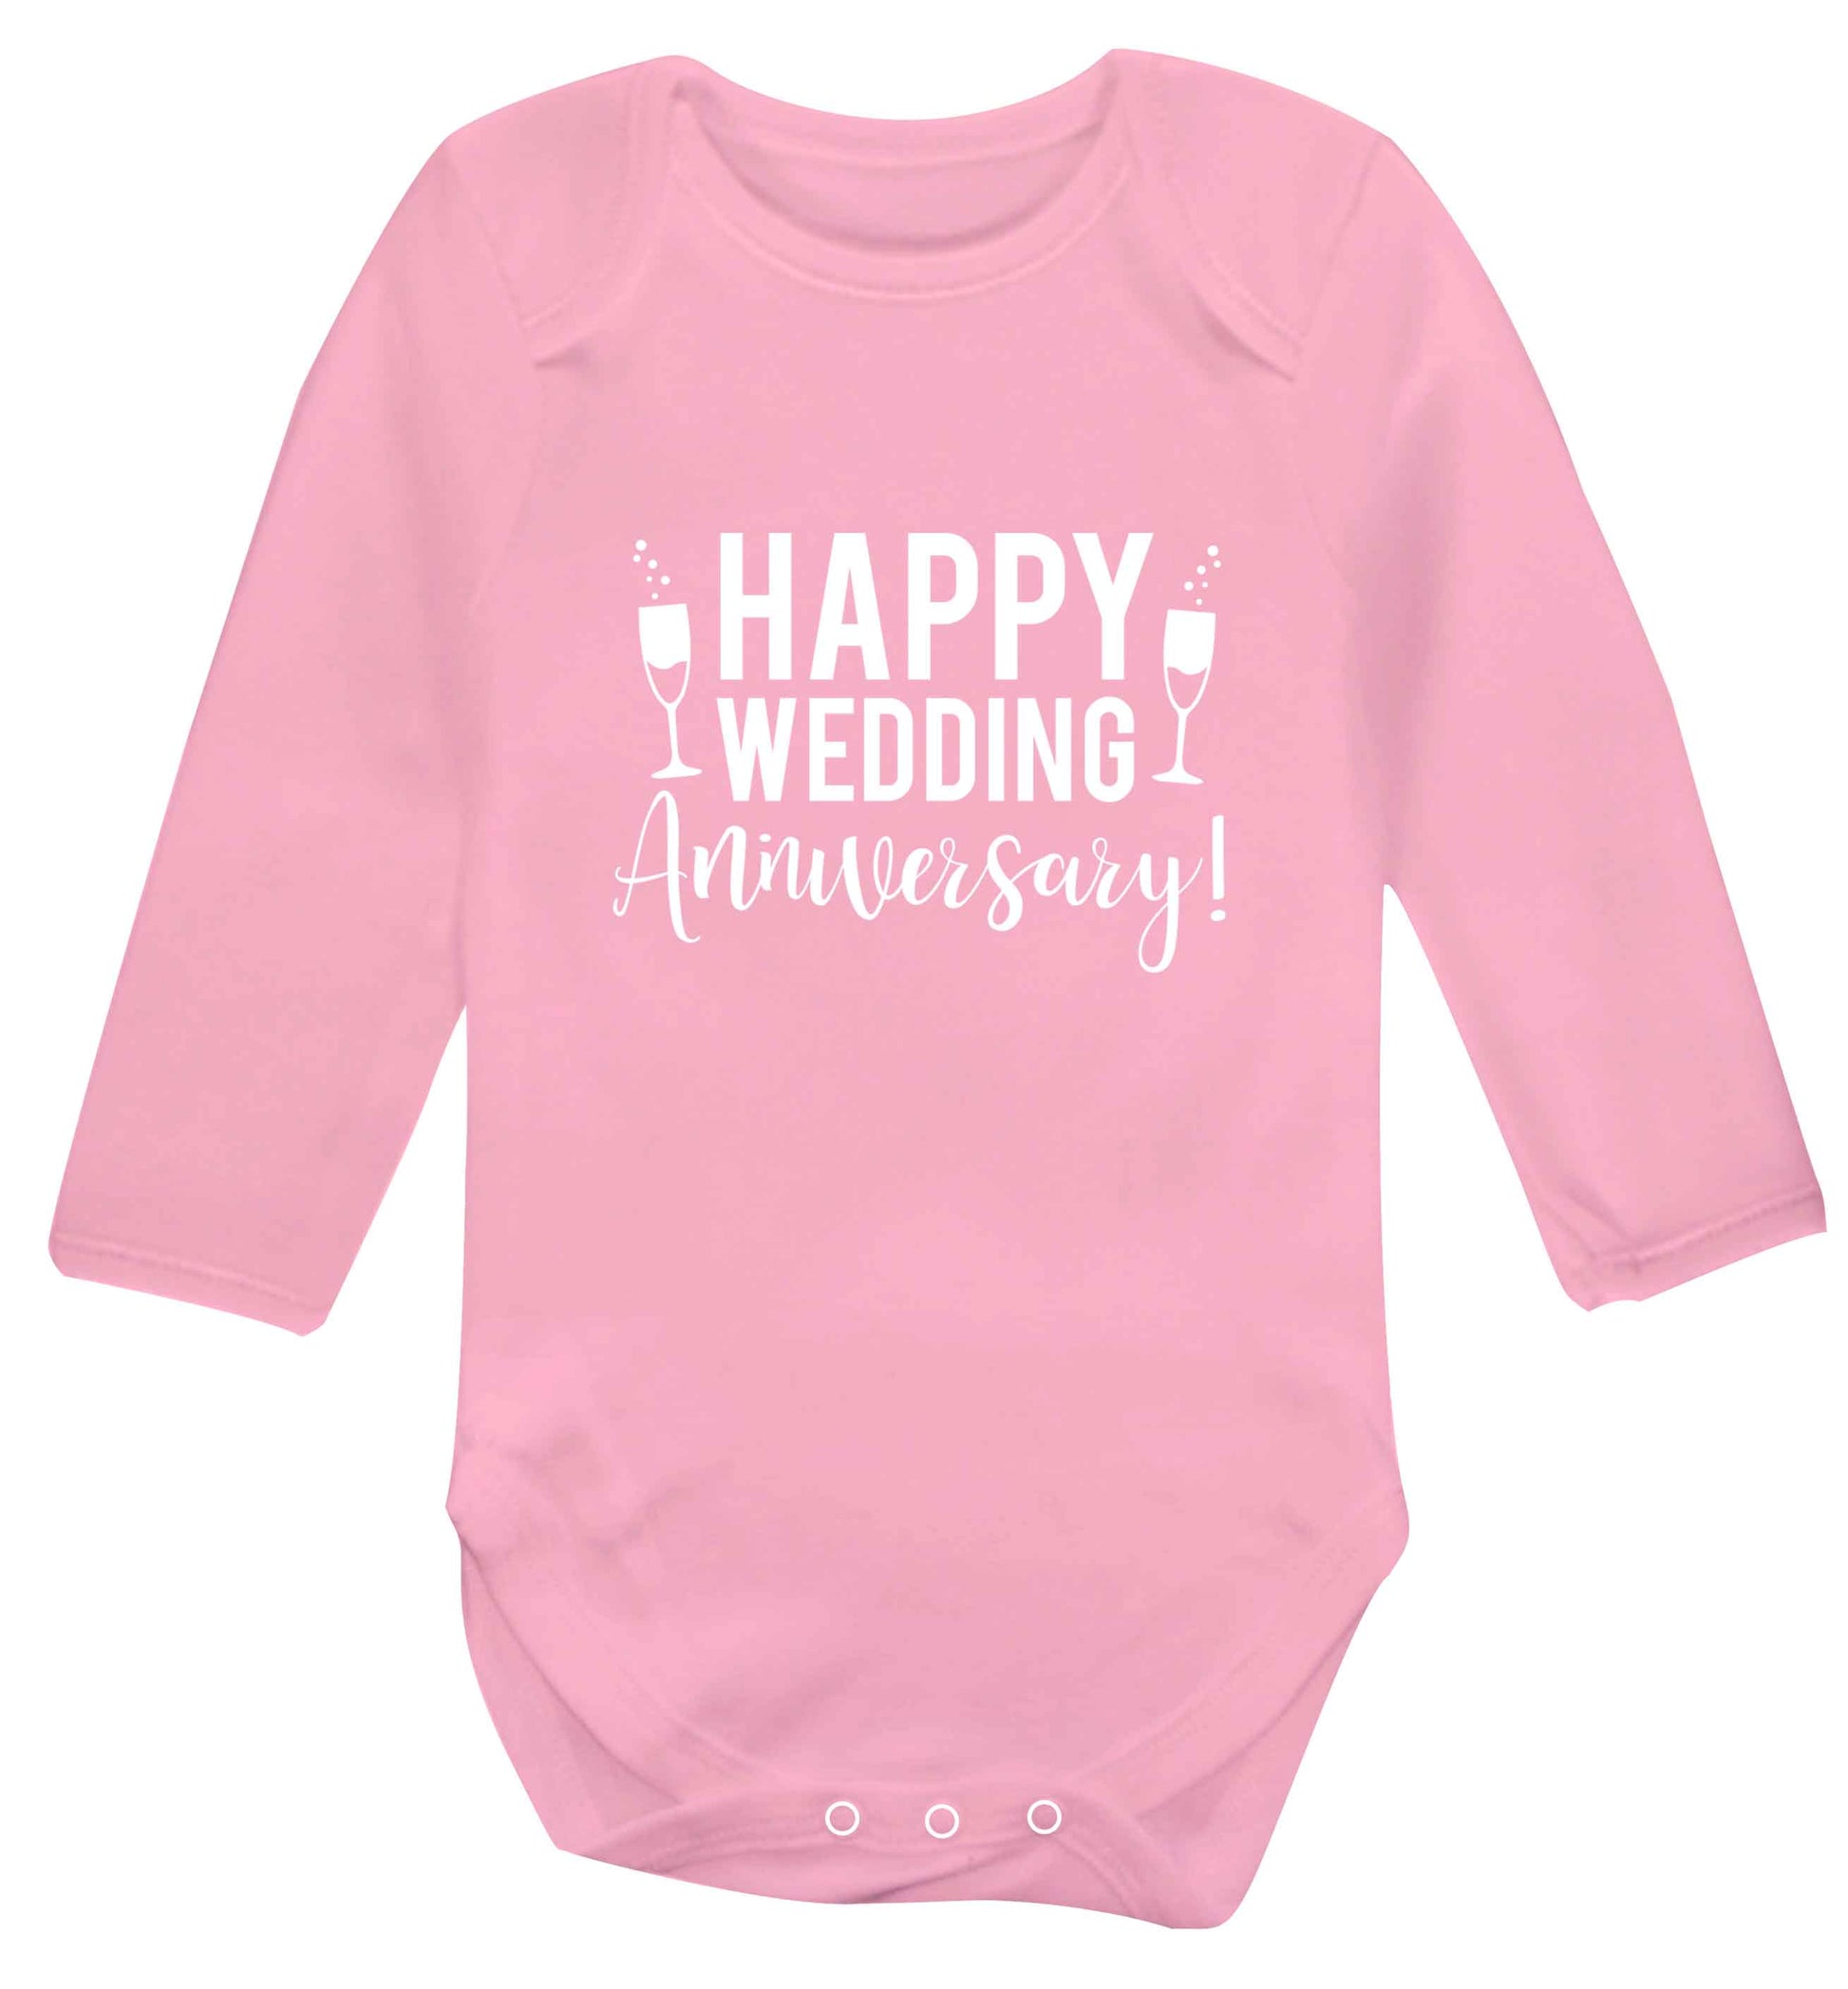 Happy wedding anniversary! baby vest long sleeved pale pink 6-12 months